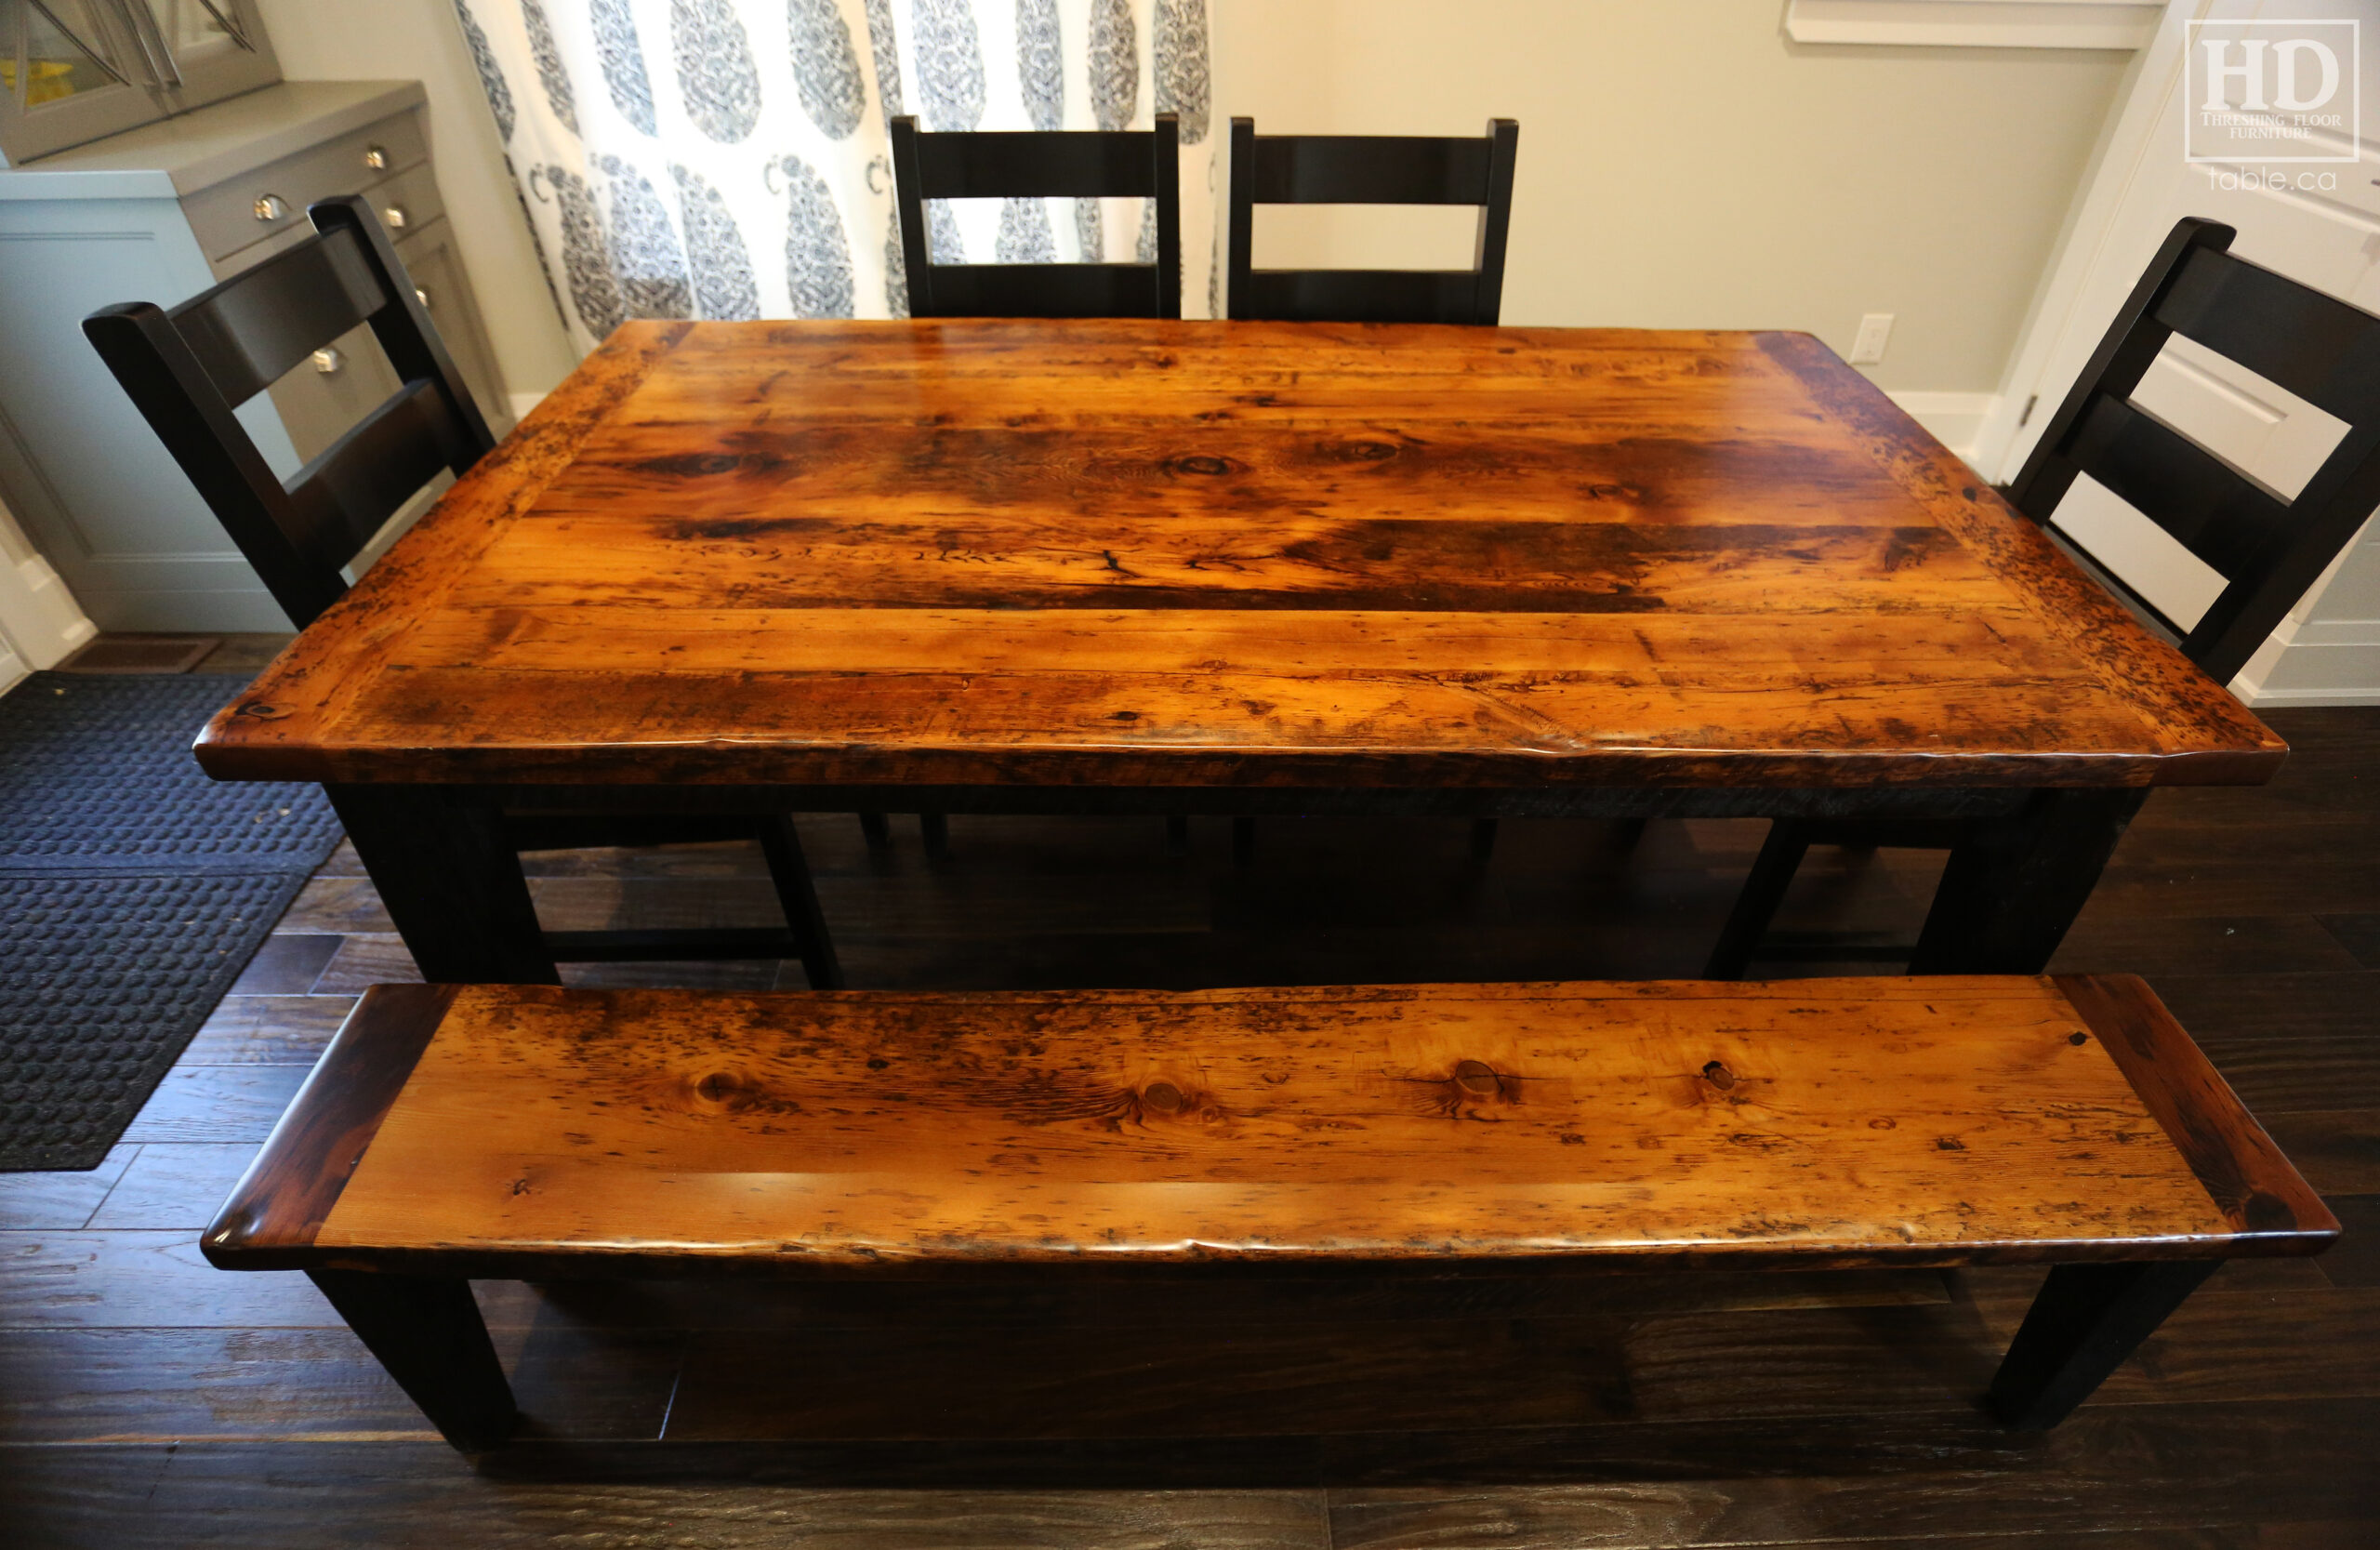 6' Reclaimed Ontario Barnwood Table we made for a Brampton home - 42" deep - Harvest Base: Tapered Windbrace Beam Legs - Black Painted Base - Old Growth Hemlock Threshing Floor Construction - Original edges & distressing maintained - Premium epoxy + satin polyurethane finish – 6' [matching] Bench - 4 Ladder Back Chairs / Wormy Maple / Black Painted Frame – Seat Stained Colour of Table - www.table.ca